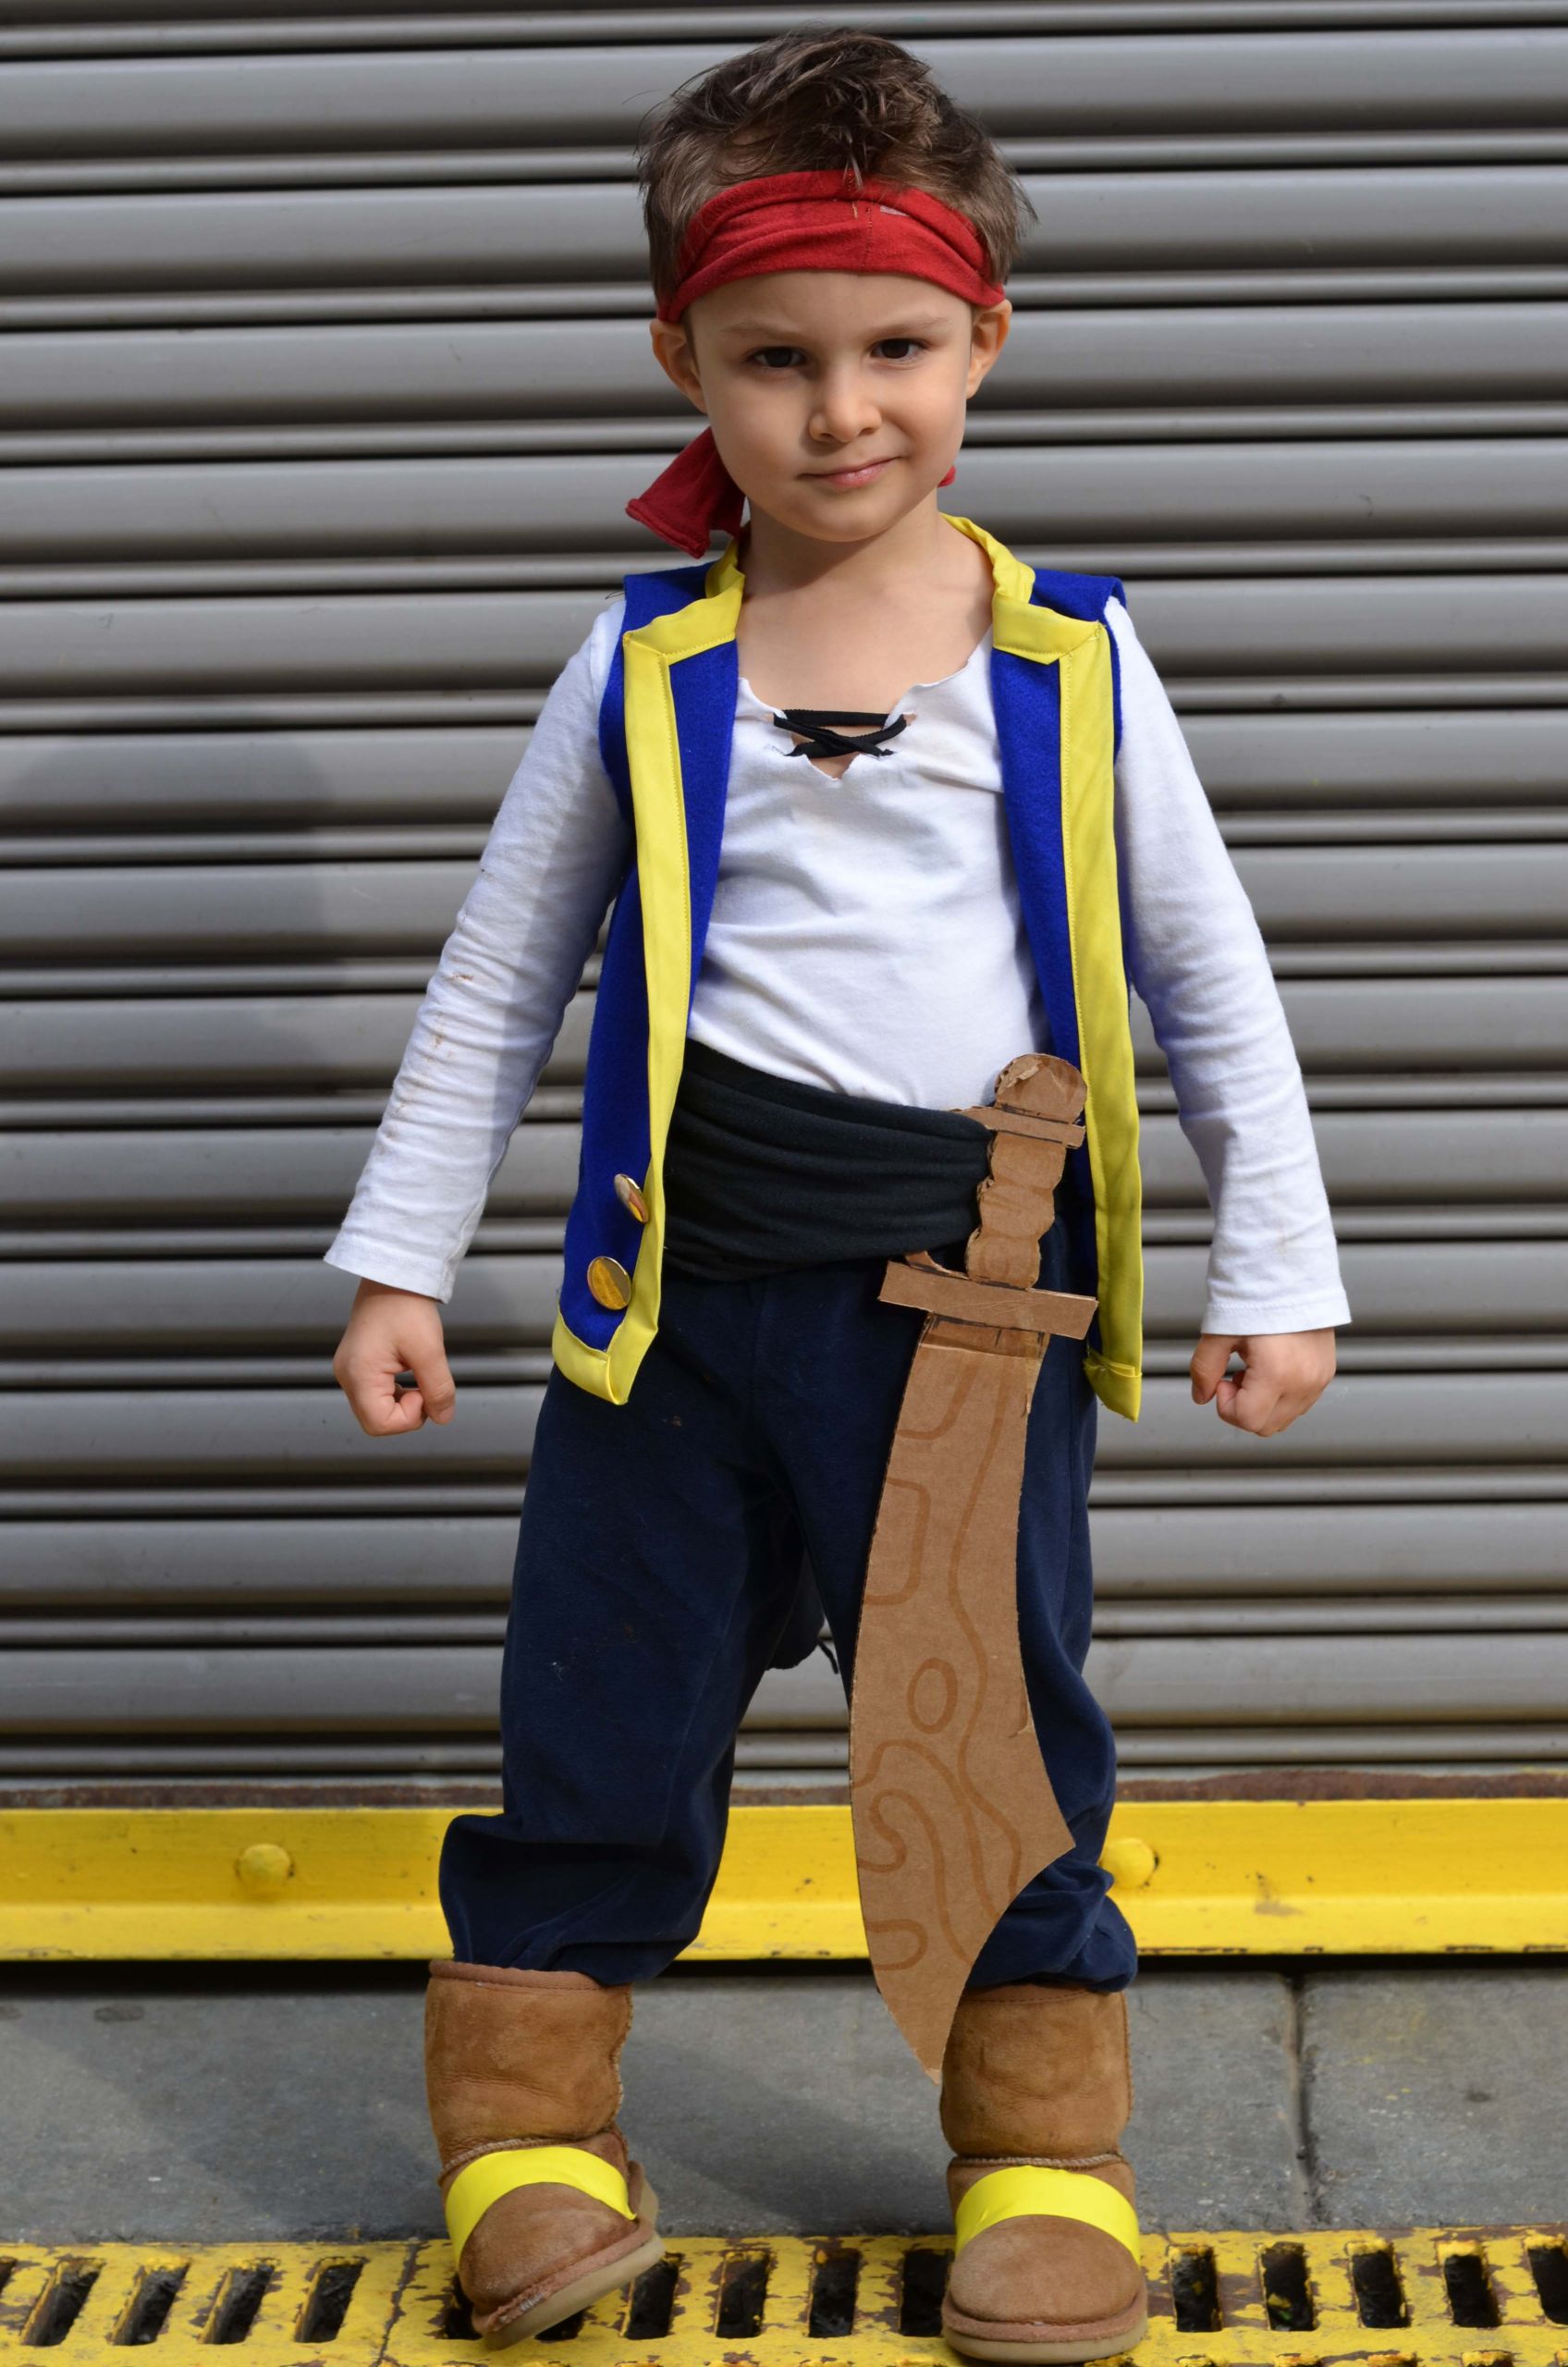 DIY Kids Costume Ideas
 DIY Jake and The Never Land Pirates Costume